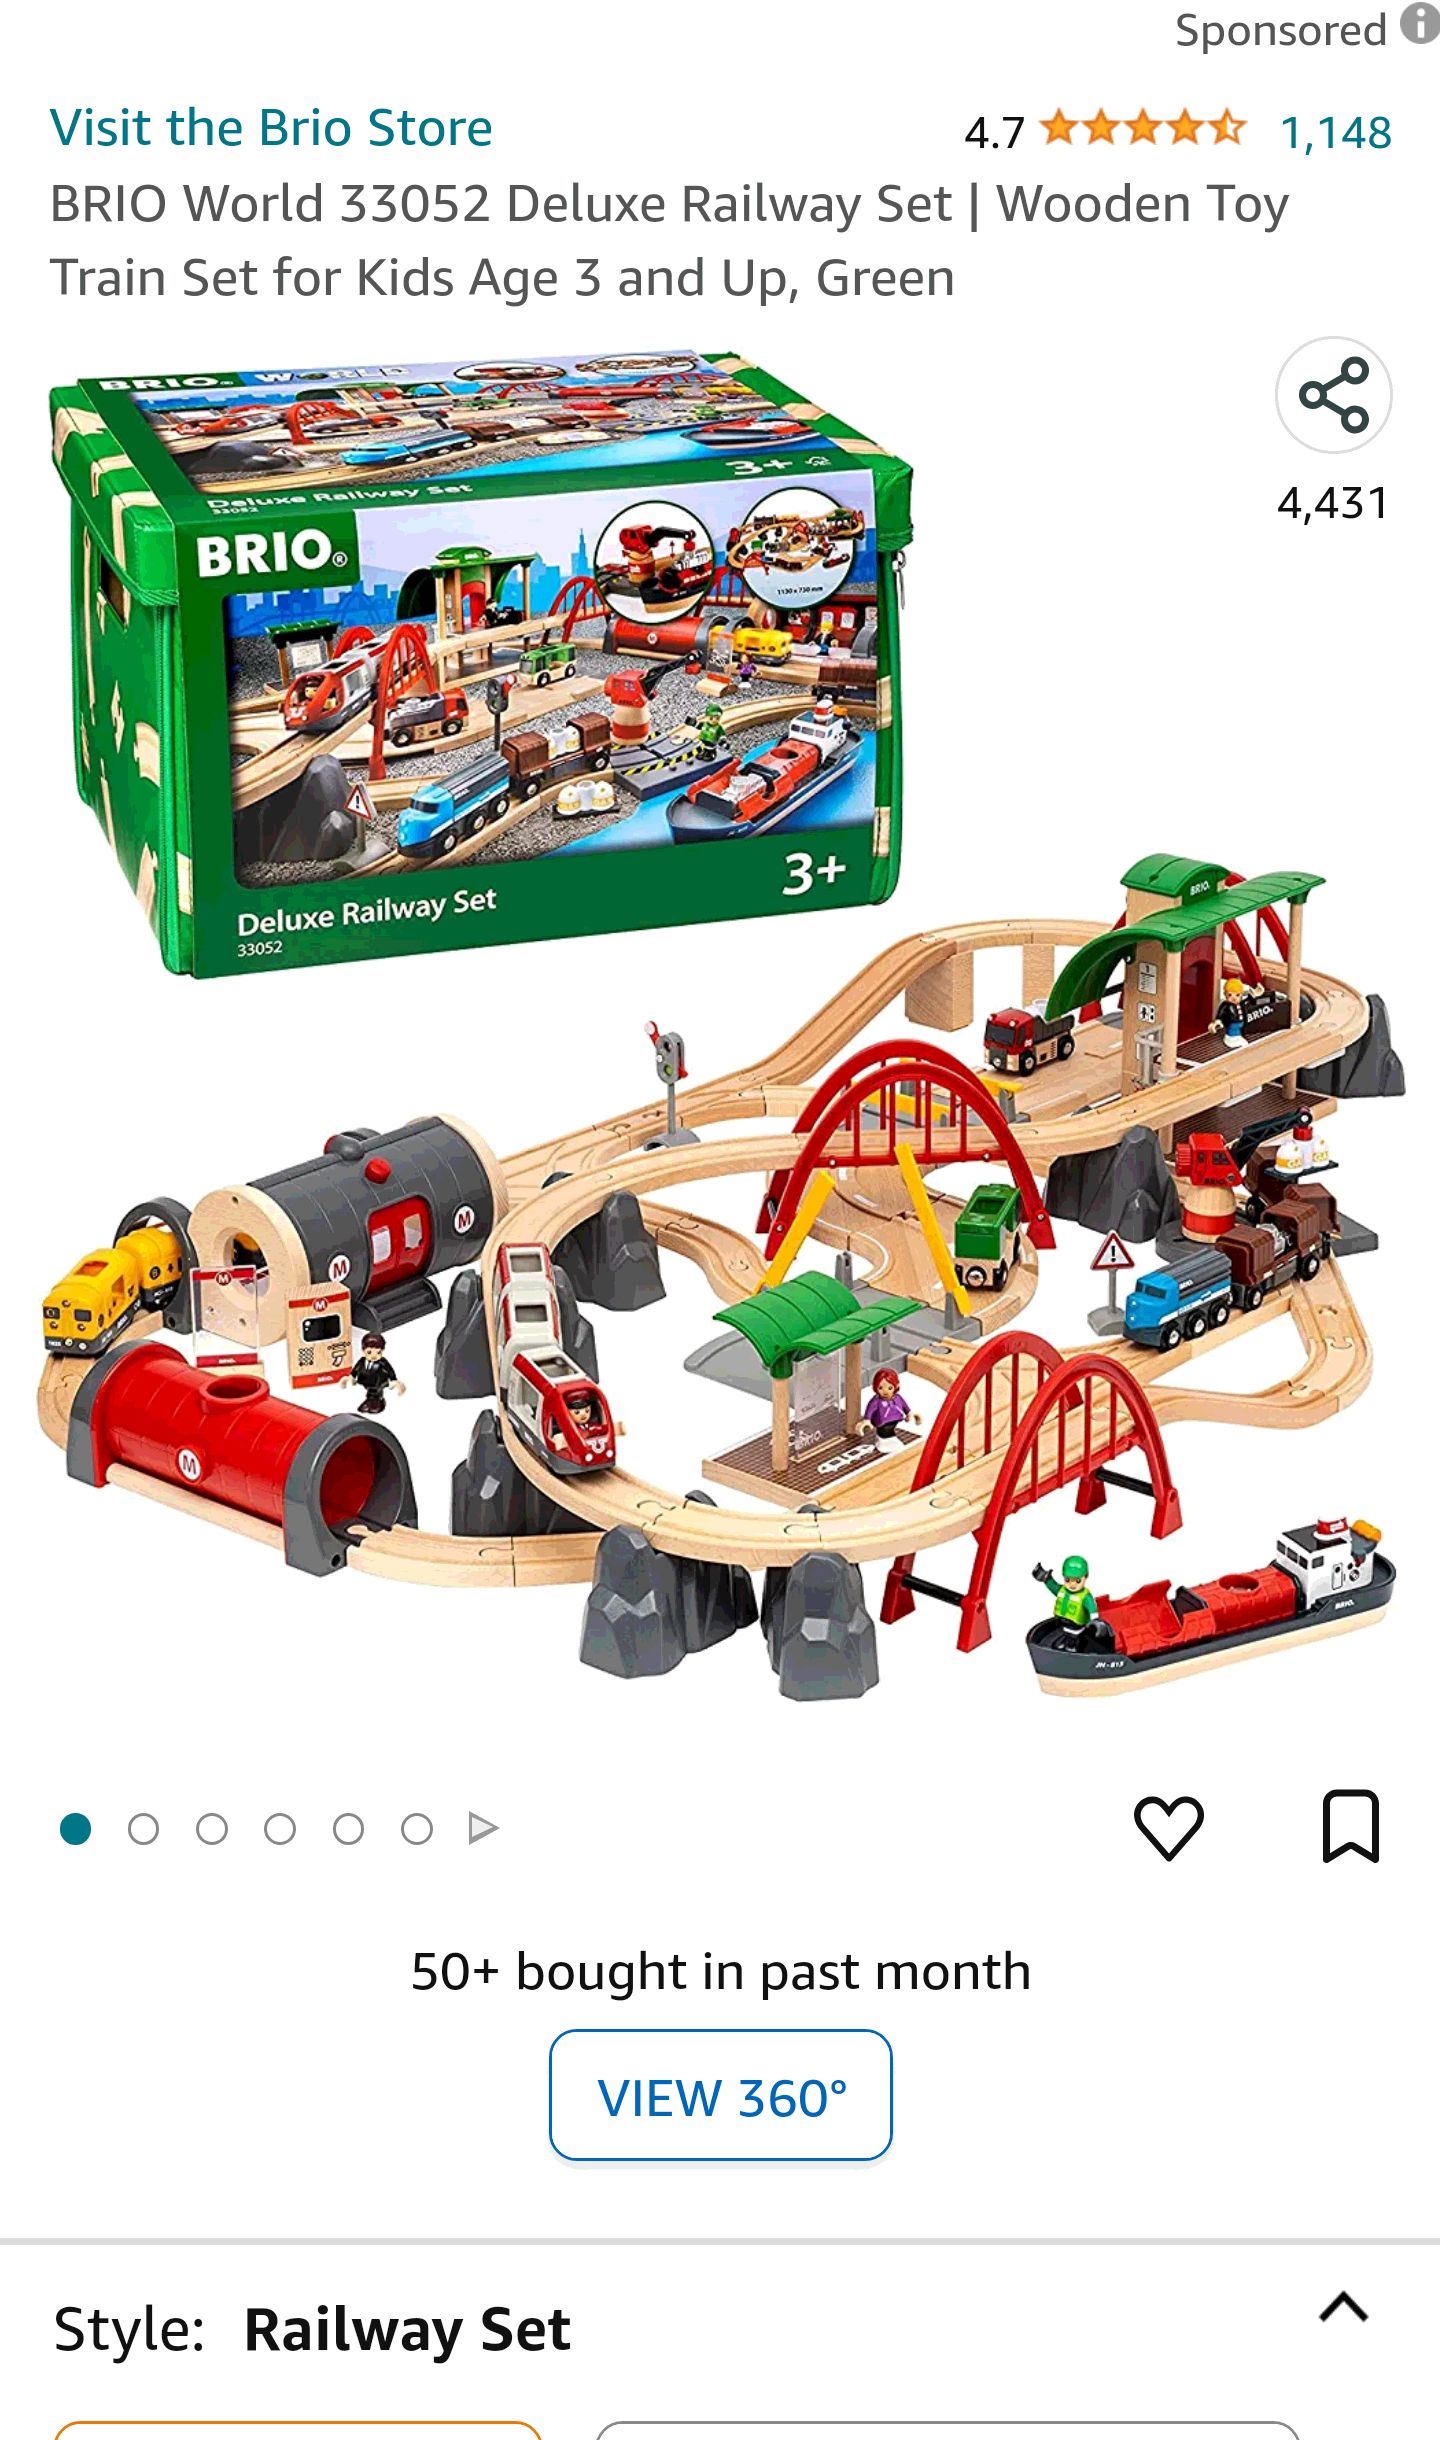 BRIO World 33052 Deluxe Railway Set | Wooden Toy Train Set for Kids Age 3 and Up, Green : Toys & Games